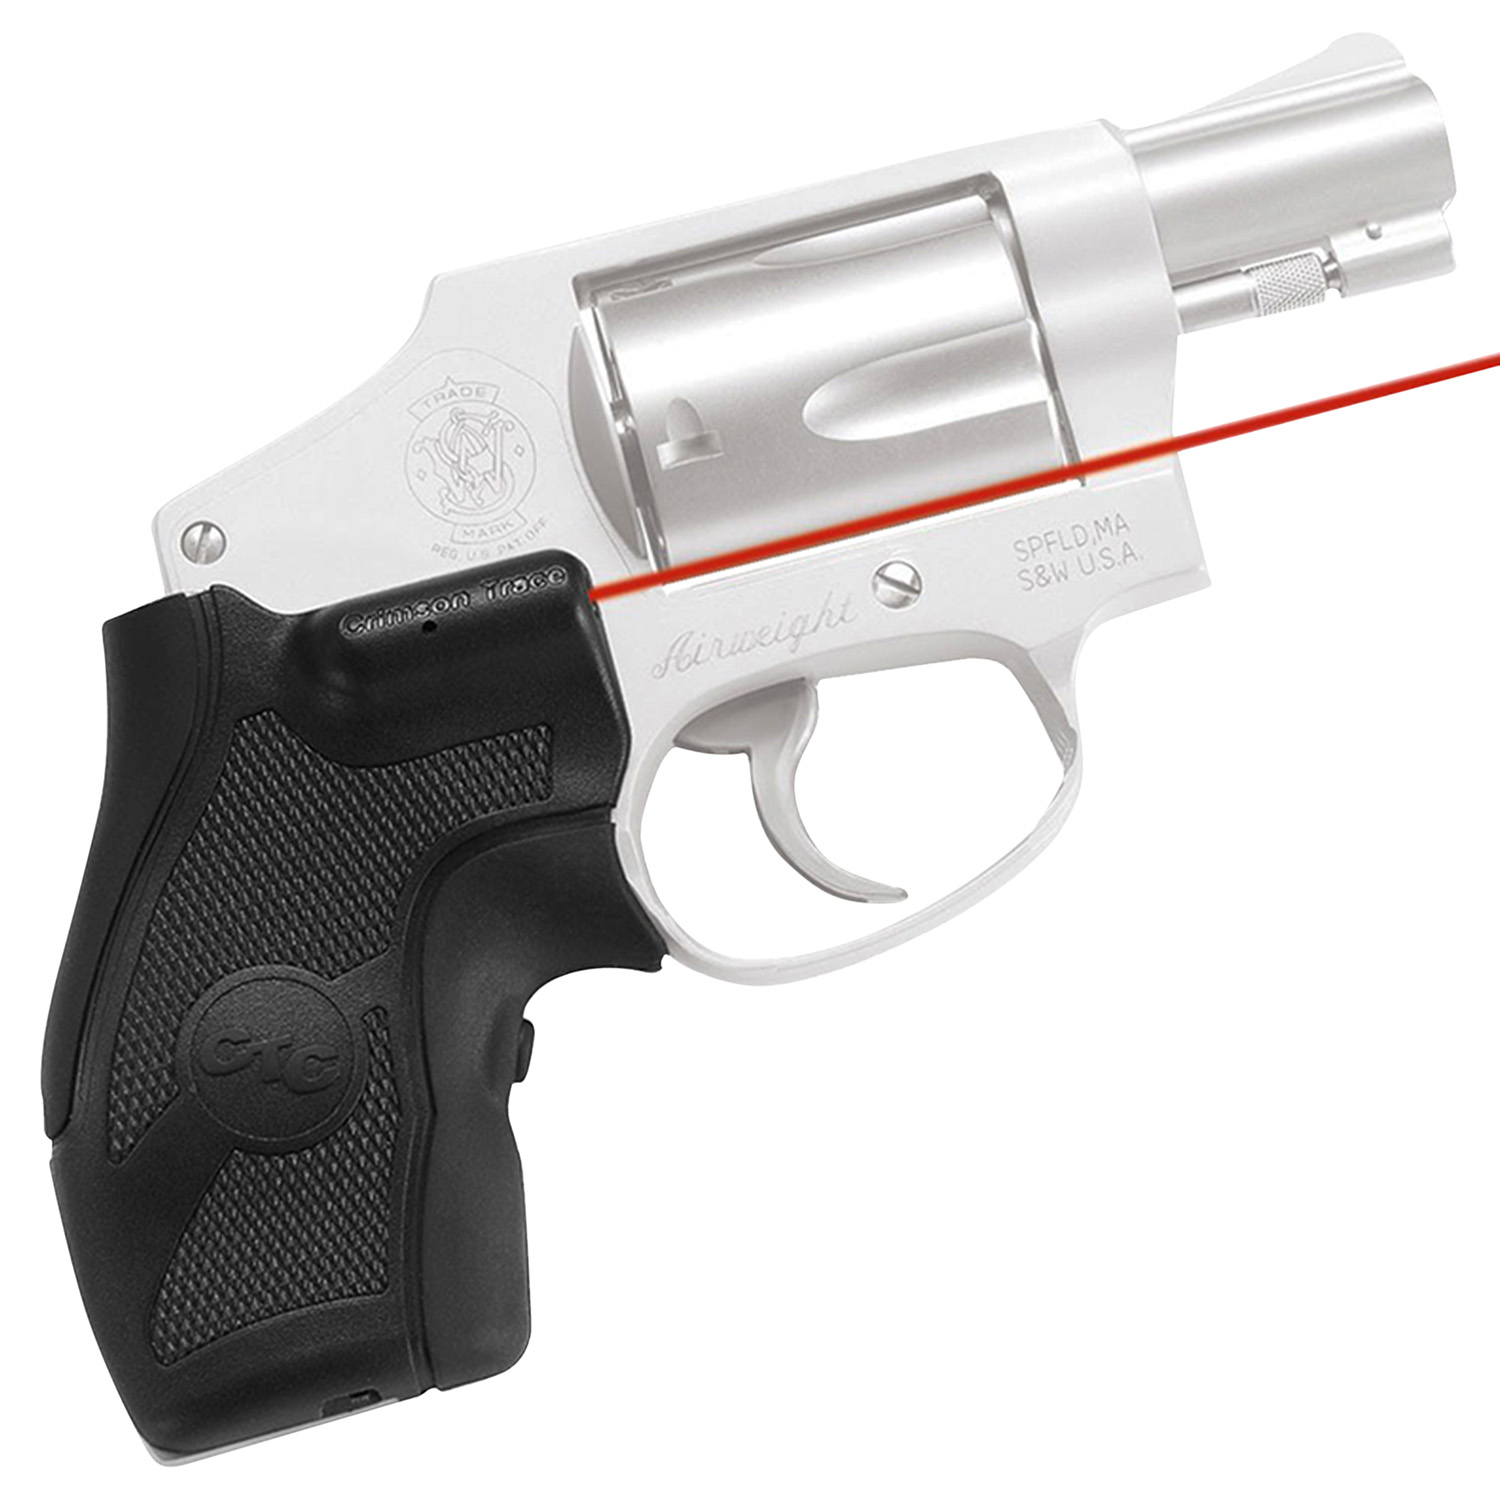 Crimson Trace LG405 Lasergrips  5mW Red Laser with 633nM Wavelength & Black Finish for Compact Round Butt S&W J Frame